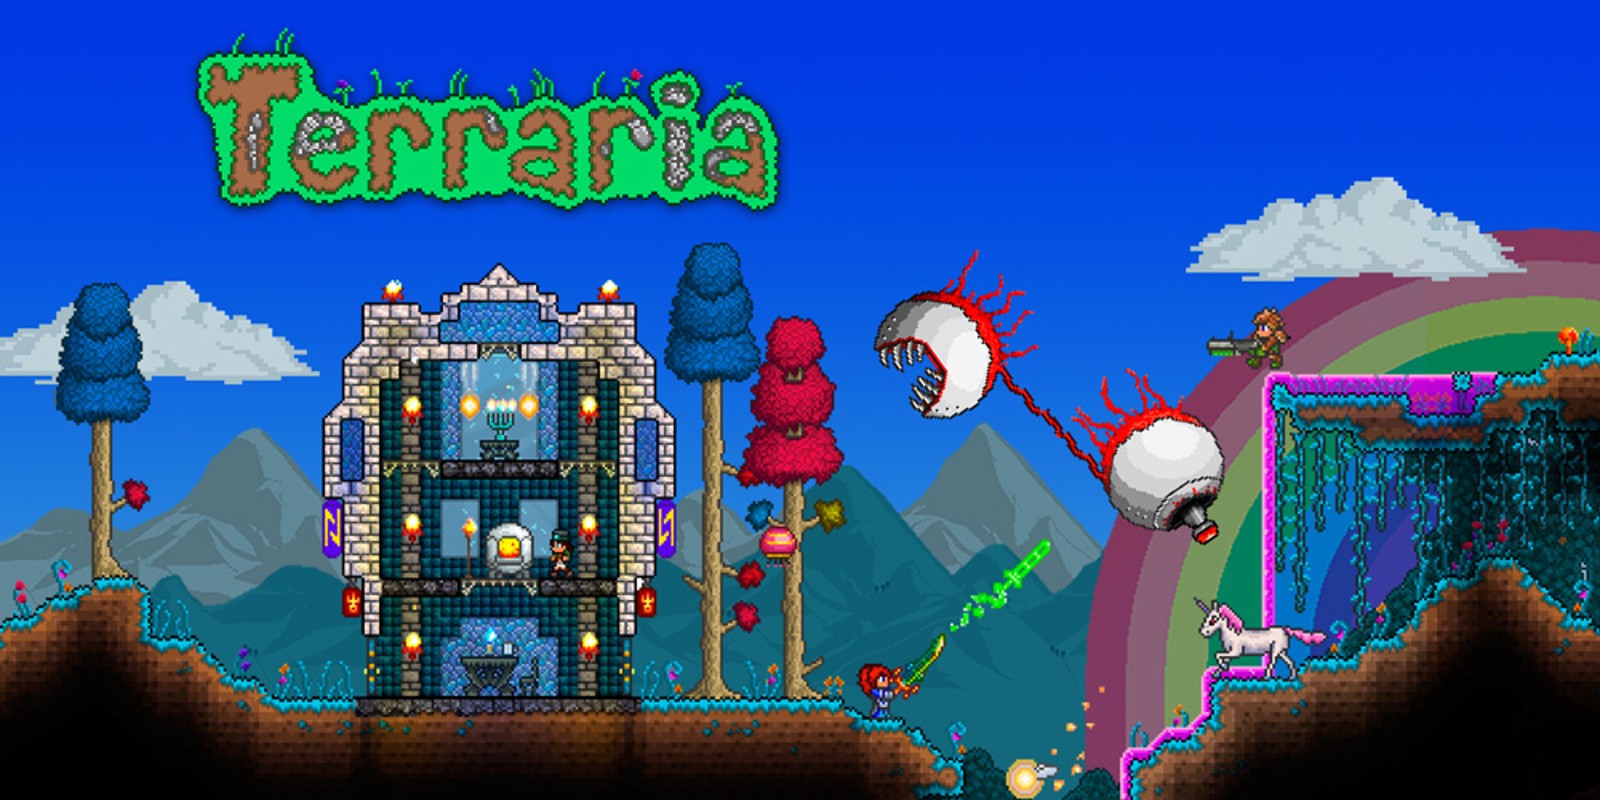 Terraria
open world android games